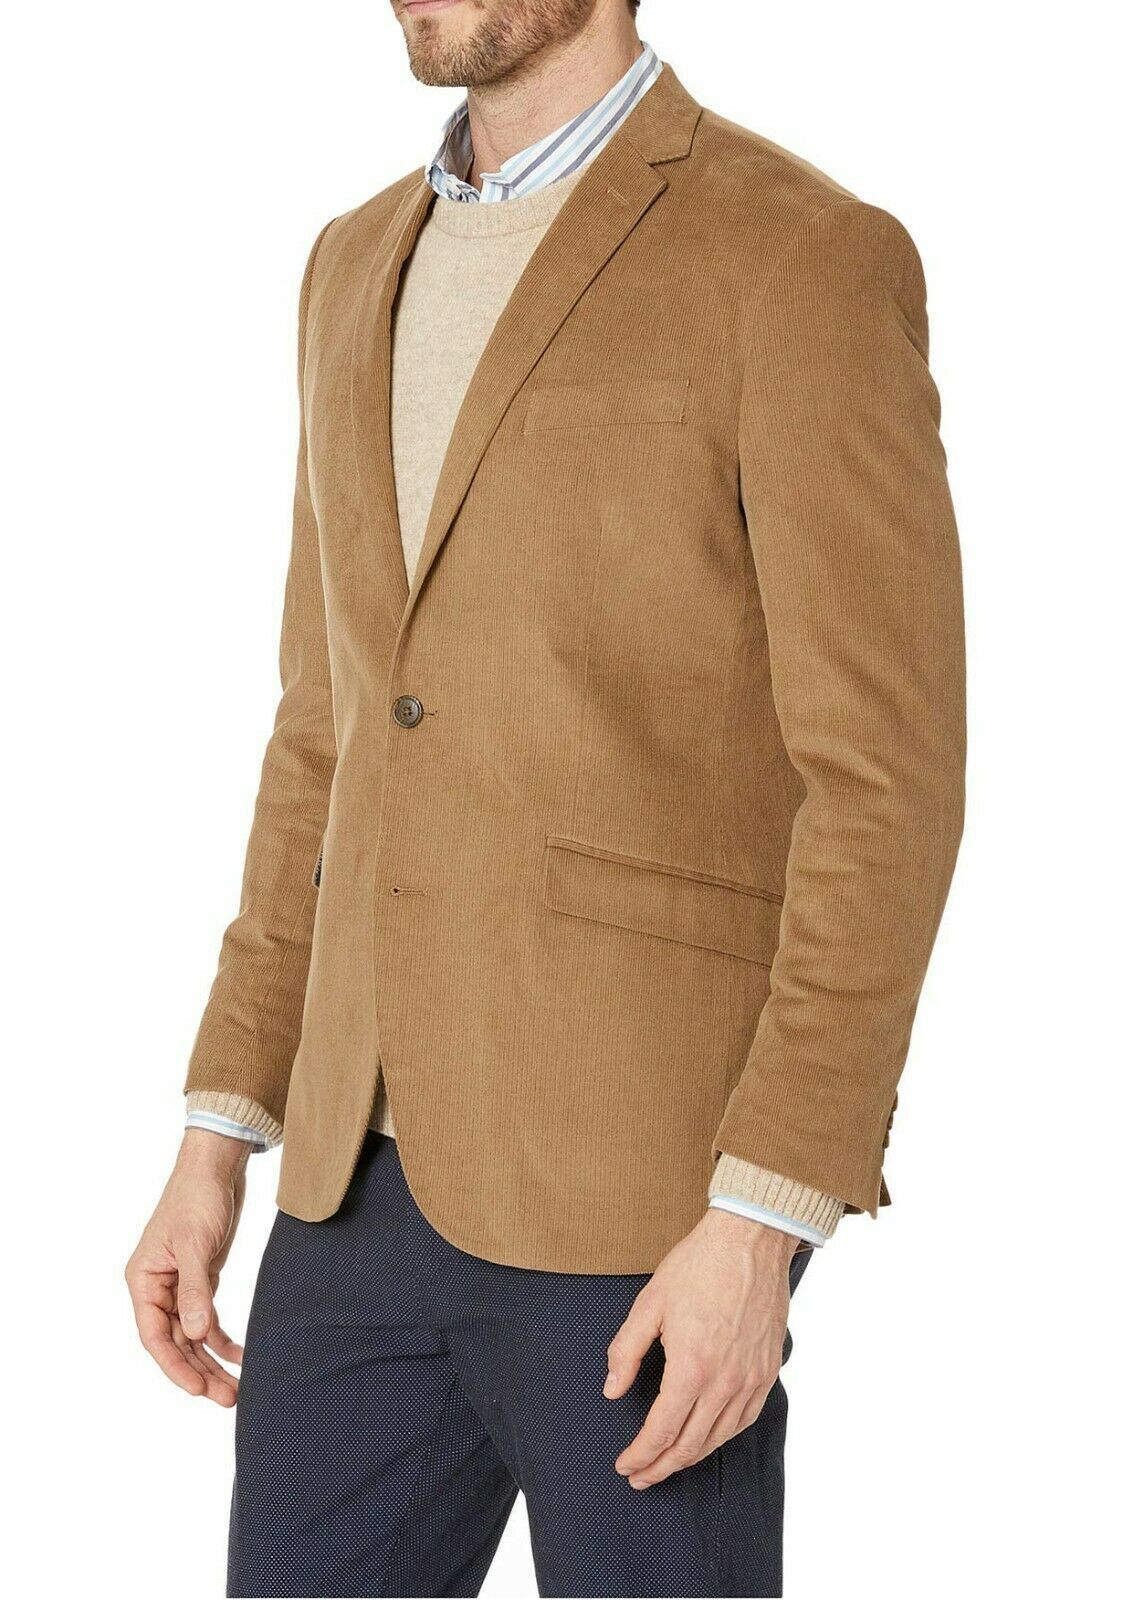 NEW MENS UNLISTED BY KENNETH COLE TAN CORDUROY SPORT COAT JACKET 36 REG ...